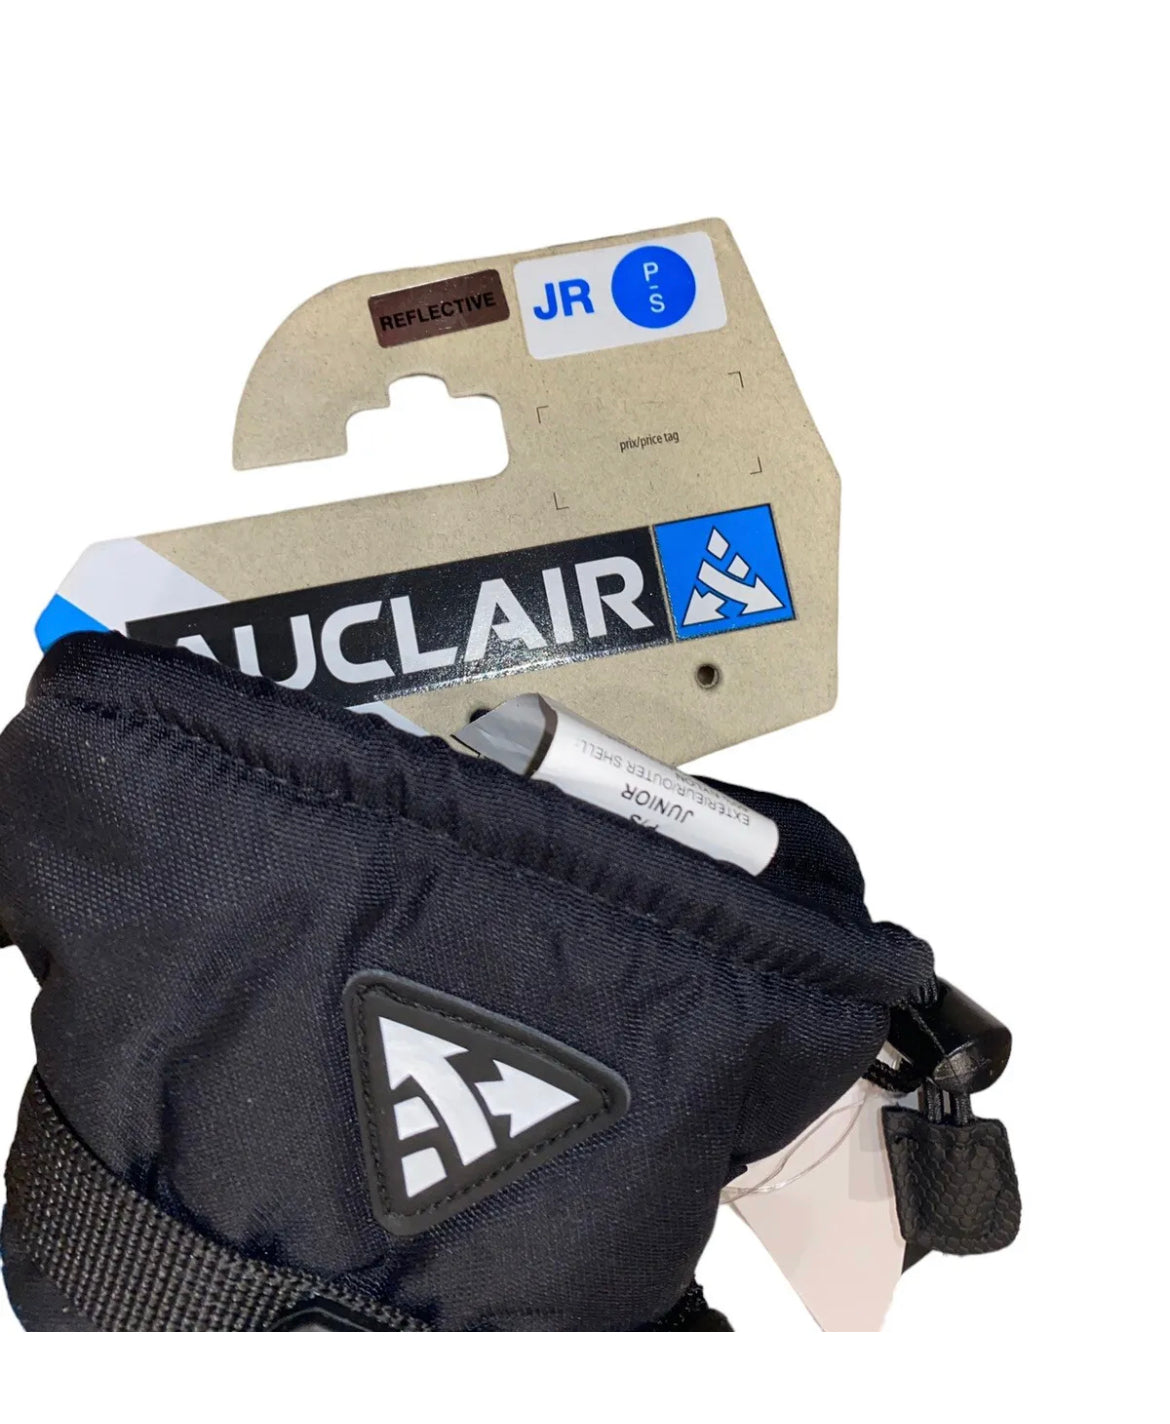 NWT AUCLAIR GLOVES juniors size Small Blue Black Reflective